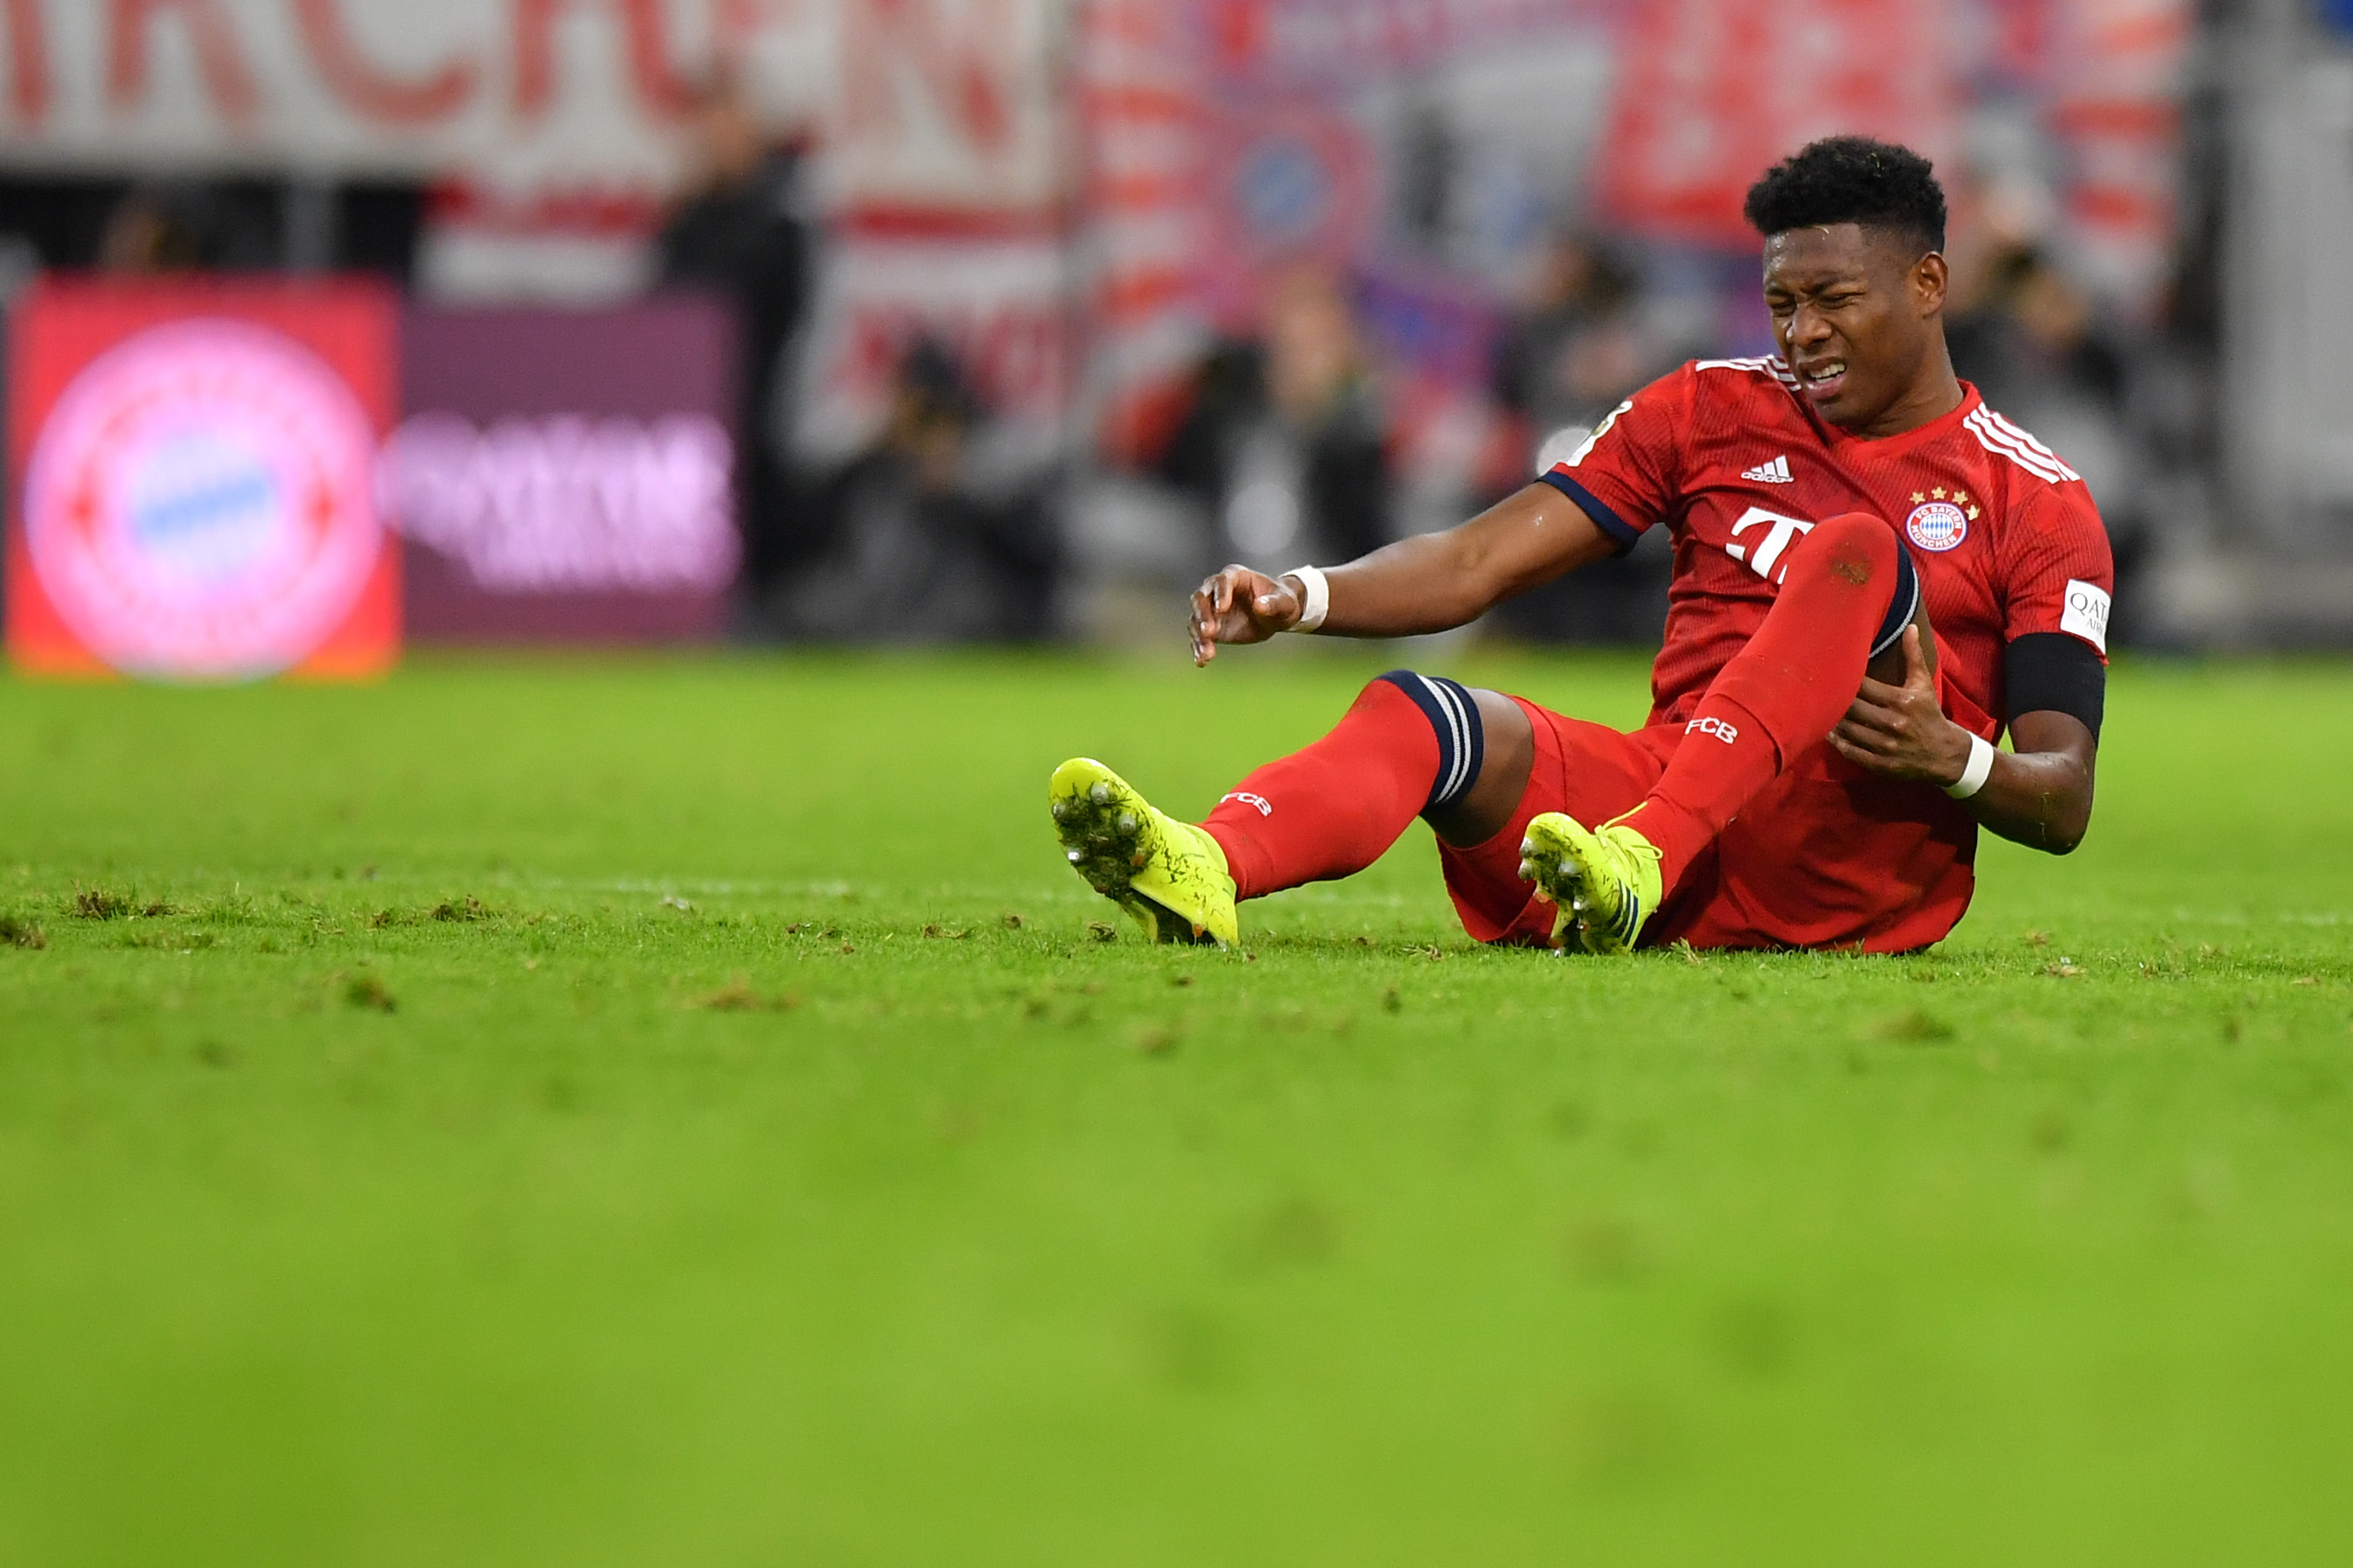 MUNICH, GERMANY - FEBRUARY 09: David Alaba of Bayern Munich holds his thigh during the Bundesliga match between FC Bayern Muenchen and FC Schalke 04 at Allianz Arena on February 09, 2019 in Munich, Germany. (Photo by Sebastian Widmann/Bongarts/Getty Images)